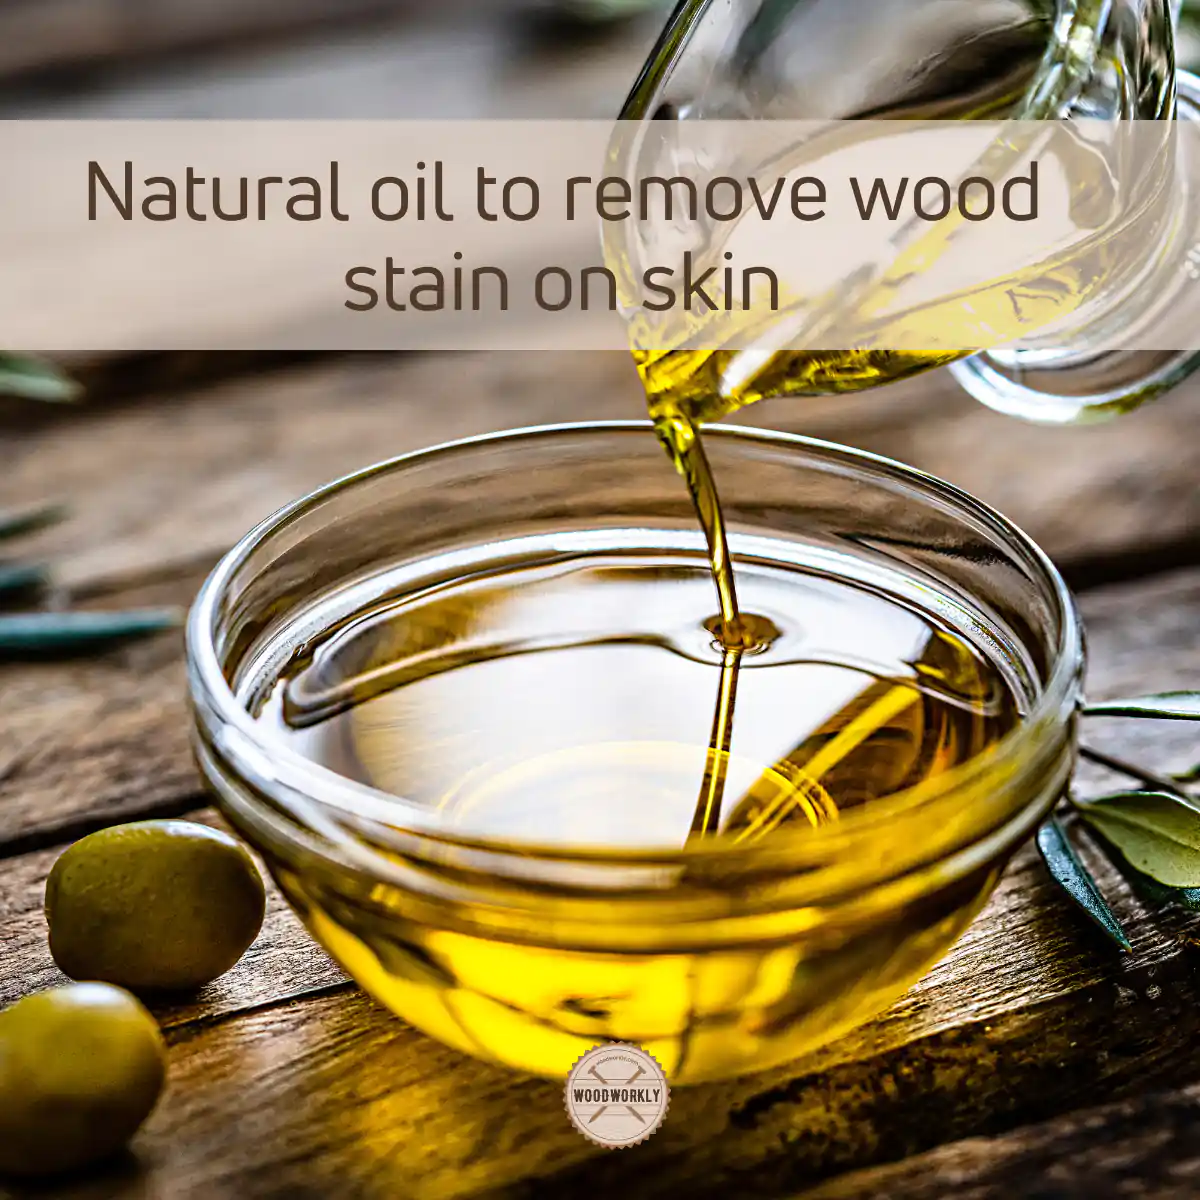 Natural oil to remove wood stain on skin